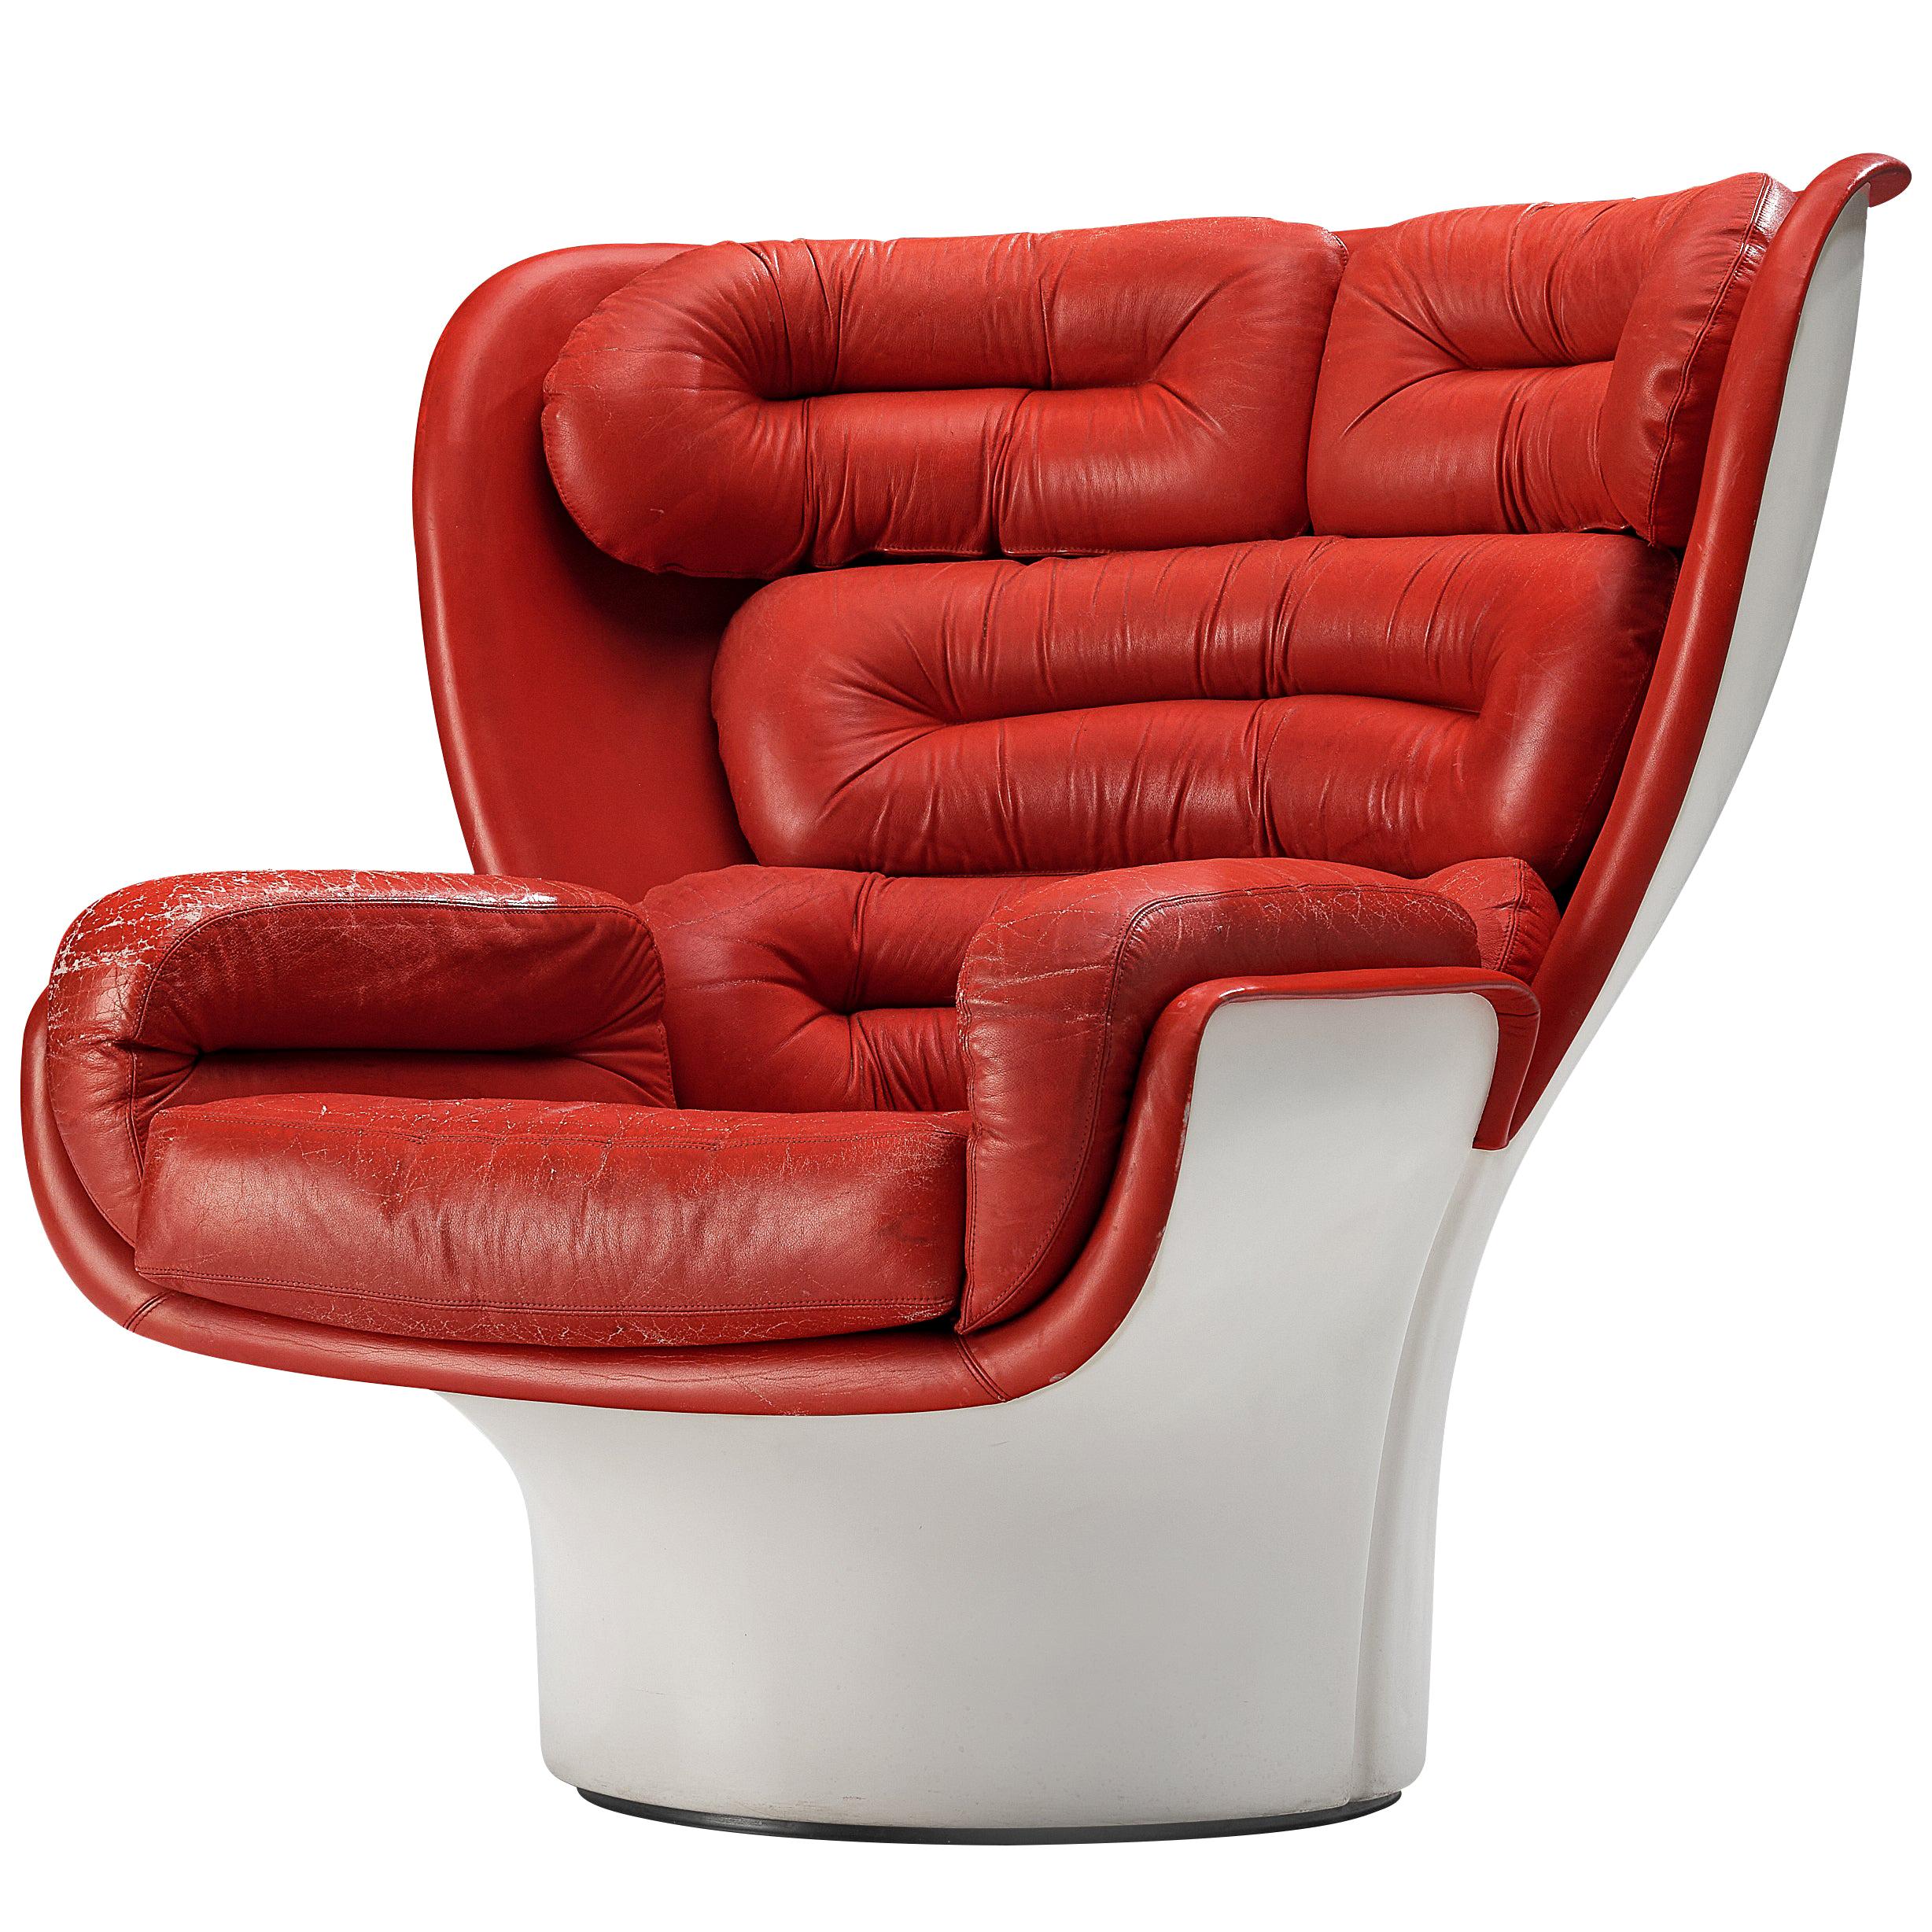 Joe Colombo Iconic ‘Elda’ Lounge Chair in Patinated Red Leather and Fiberglass